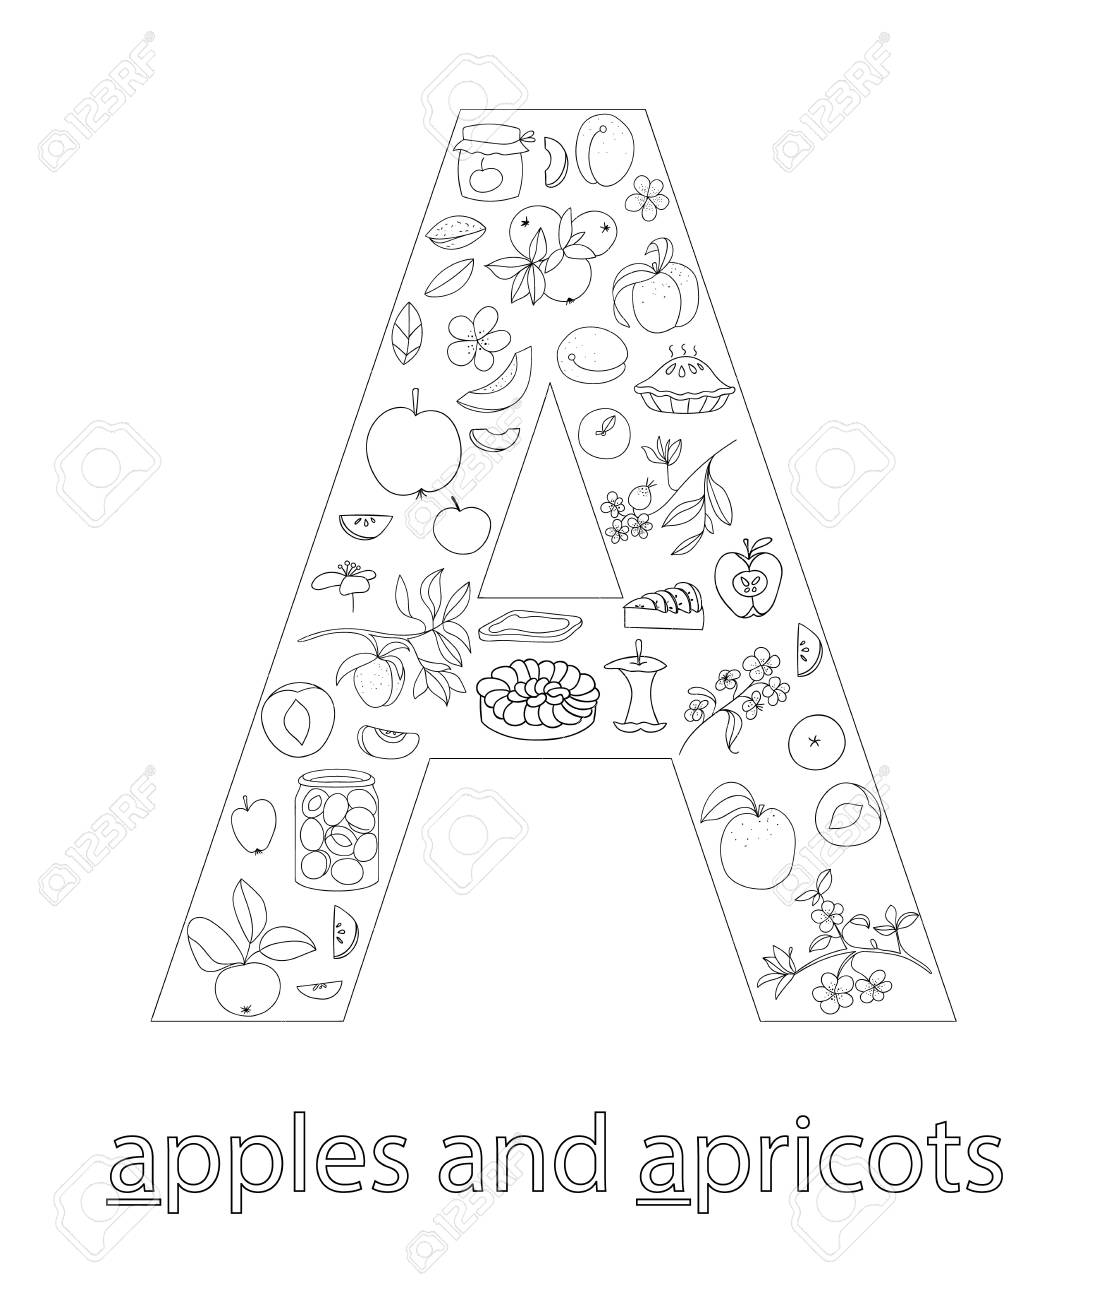 Black and white alphabet letter a phonics flashcard cute letter a for teaching reading with cartoon style apples and apricots coloring page for children royalty free svg cliparts vectors and stock illustration